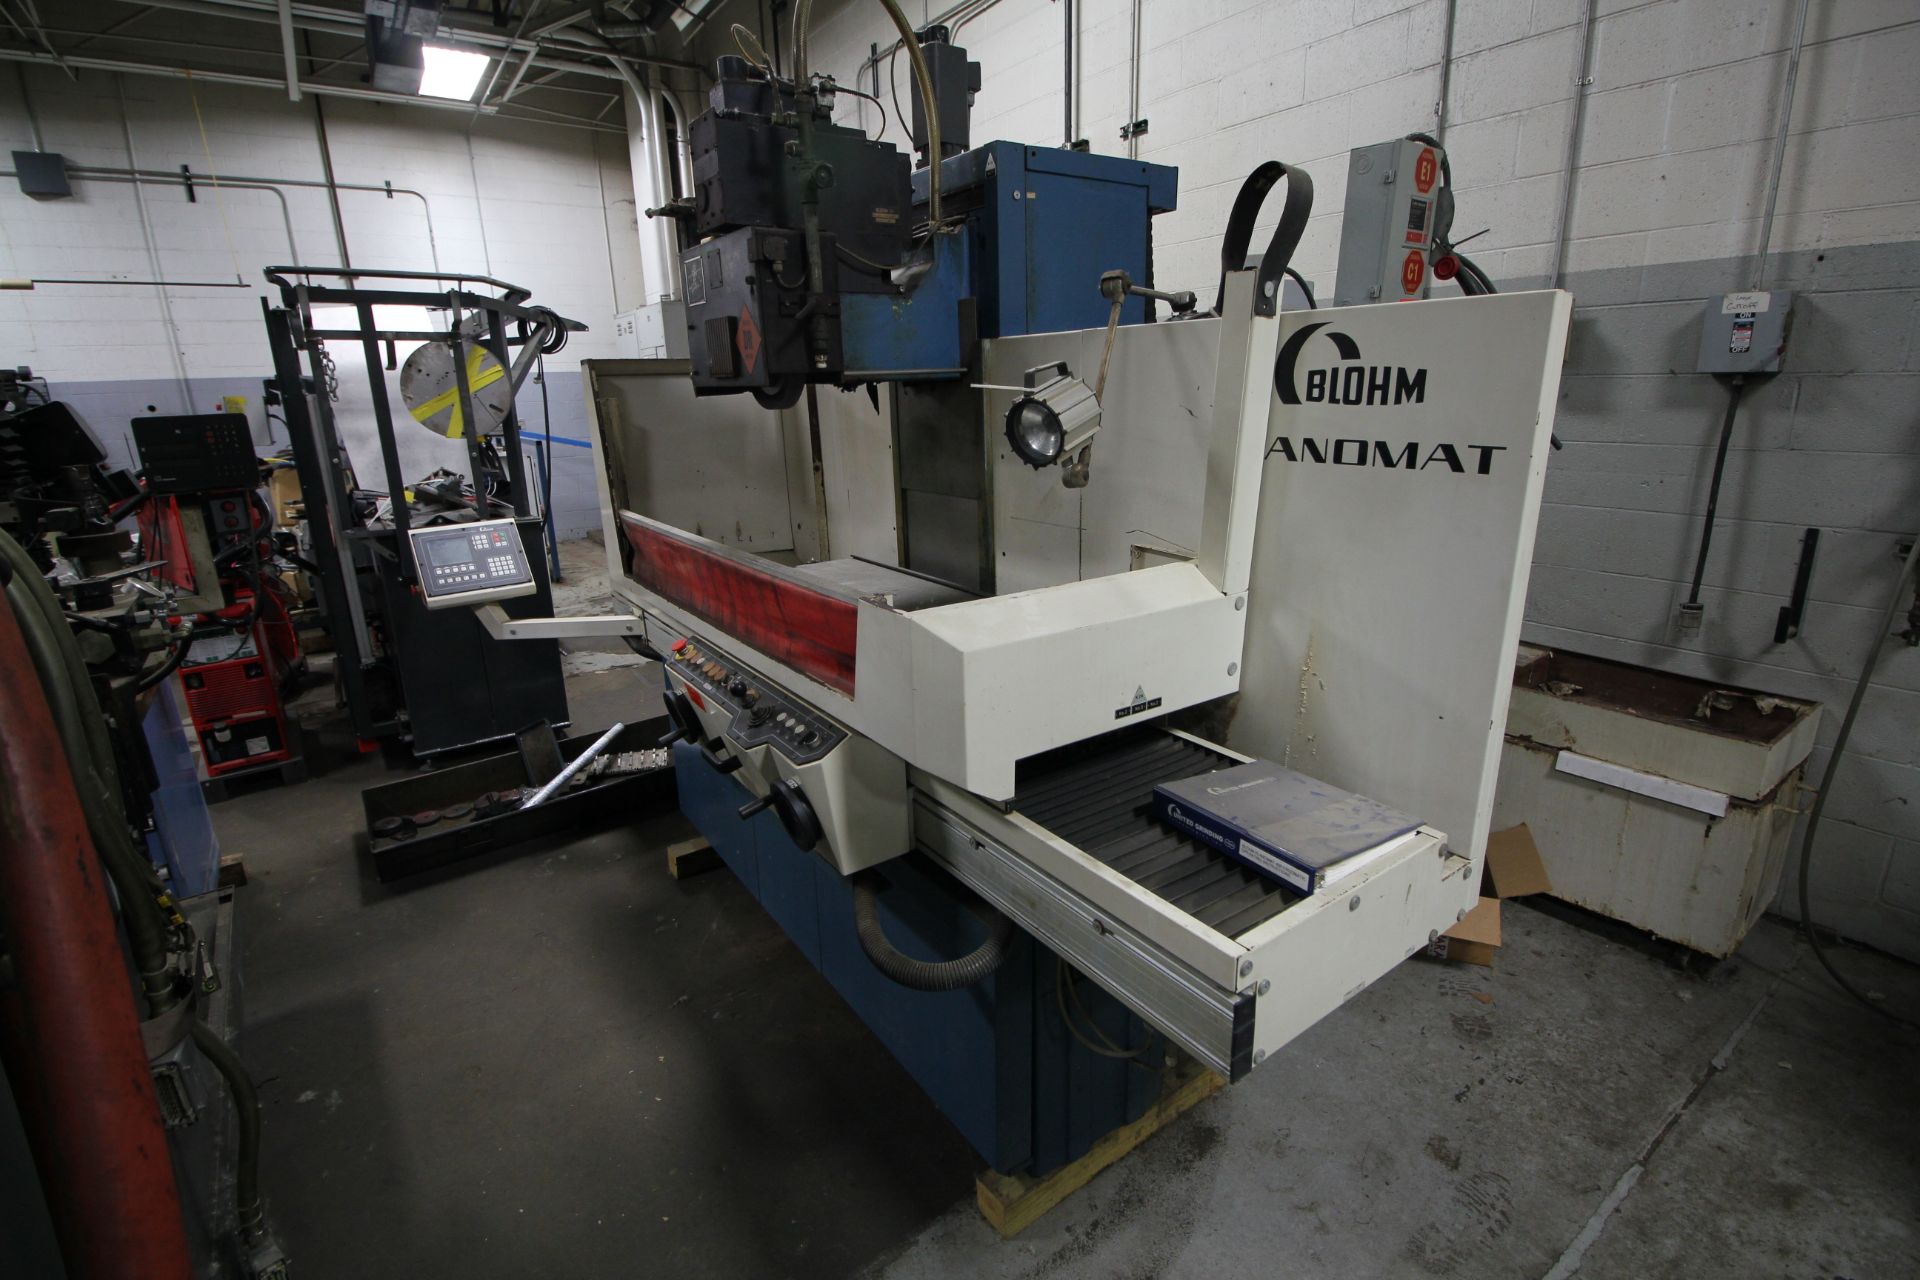 BLOHM PLANOMAT 408 16" X 32" PROGRAMMABLE SURFACE GRINDER, YEAR 1995, SN 14228 - Image 2 of 5